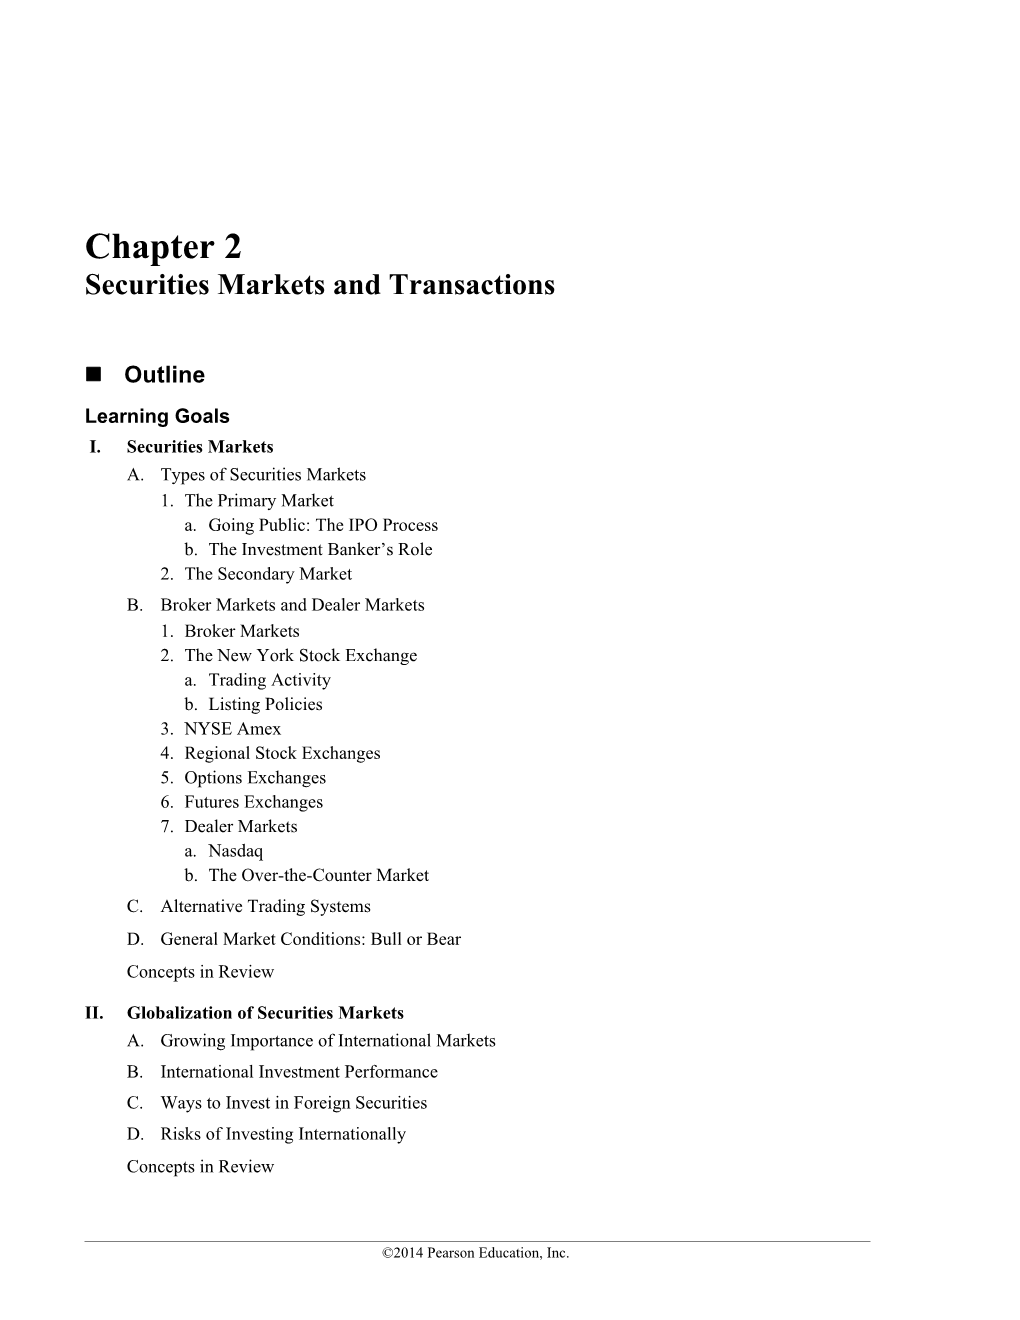 Chapter 2 Securities Markets and Transactions